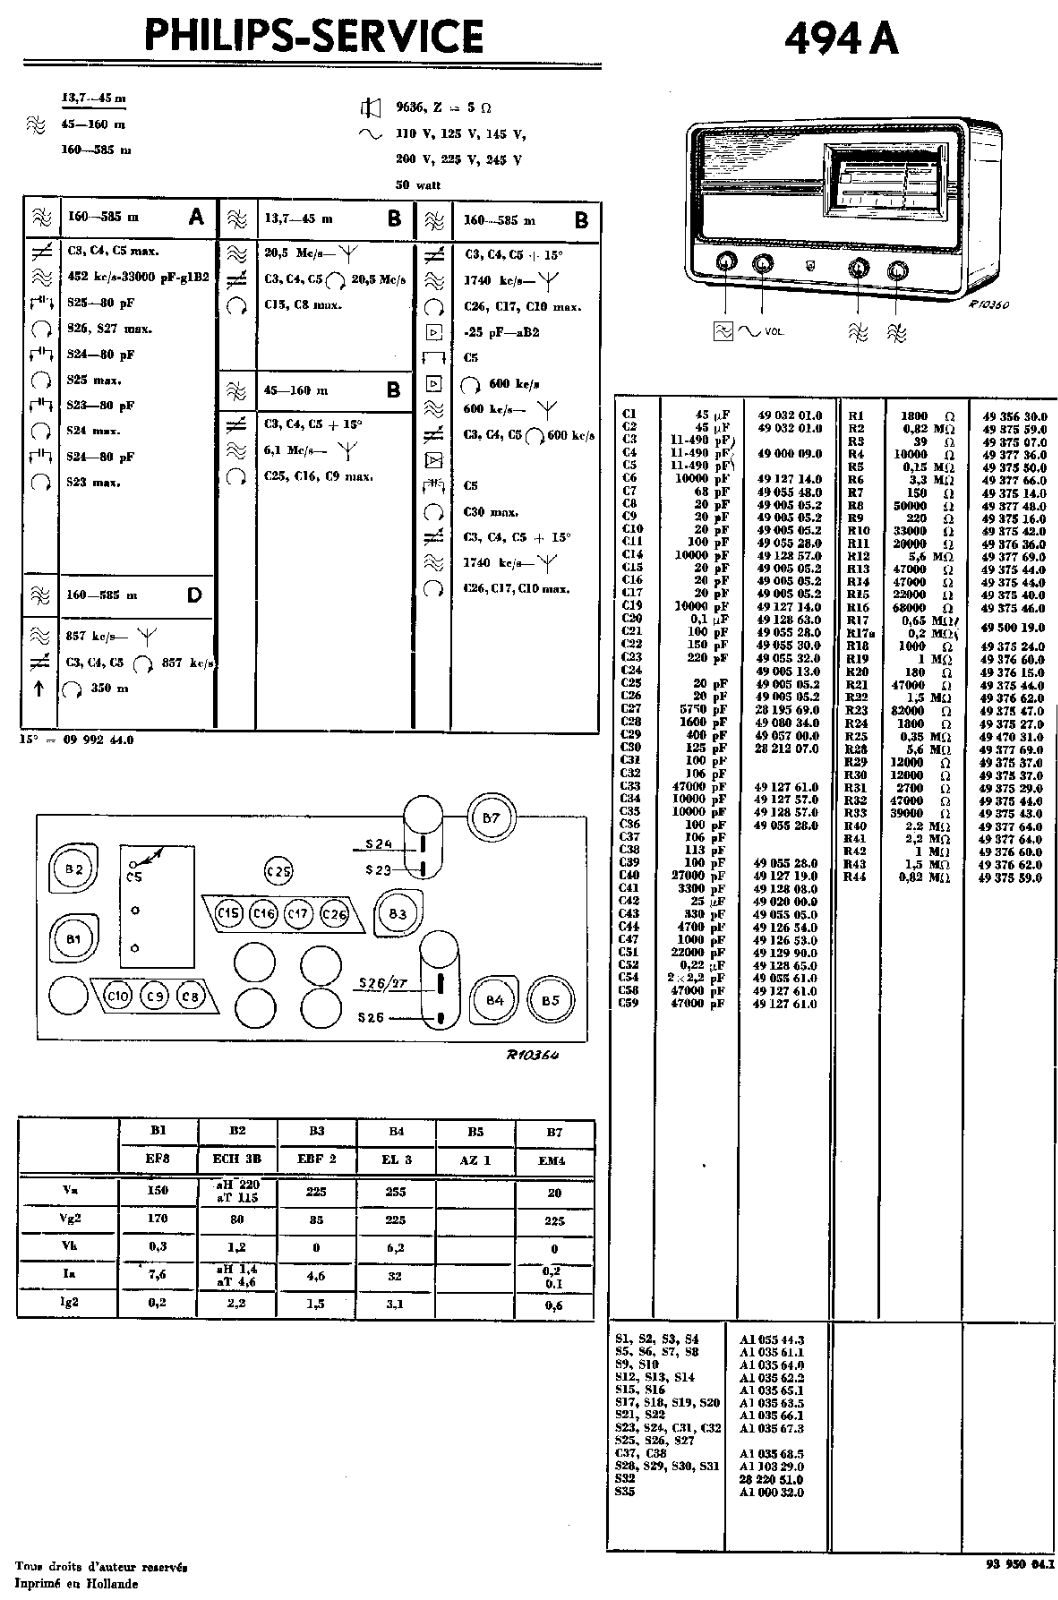 Philips 494-A Service Manual